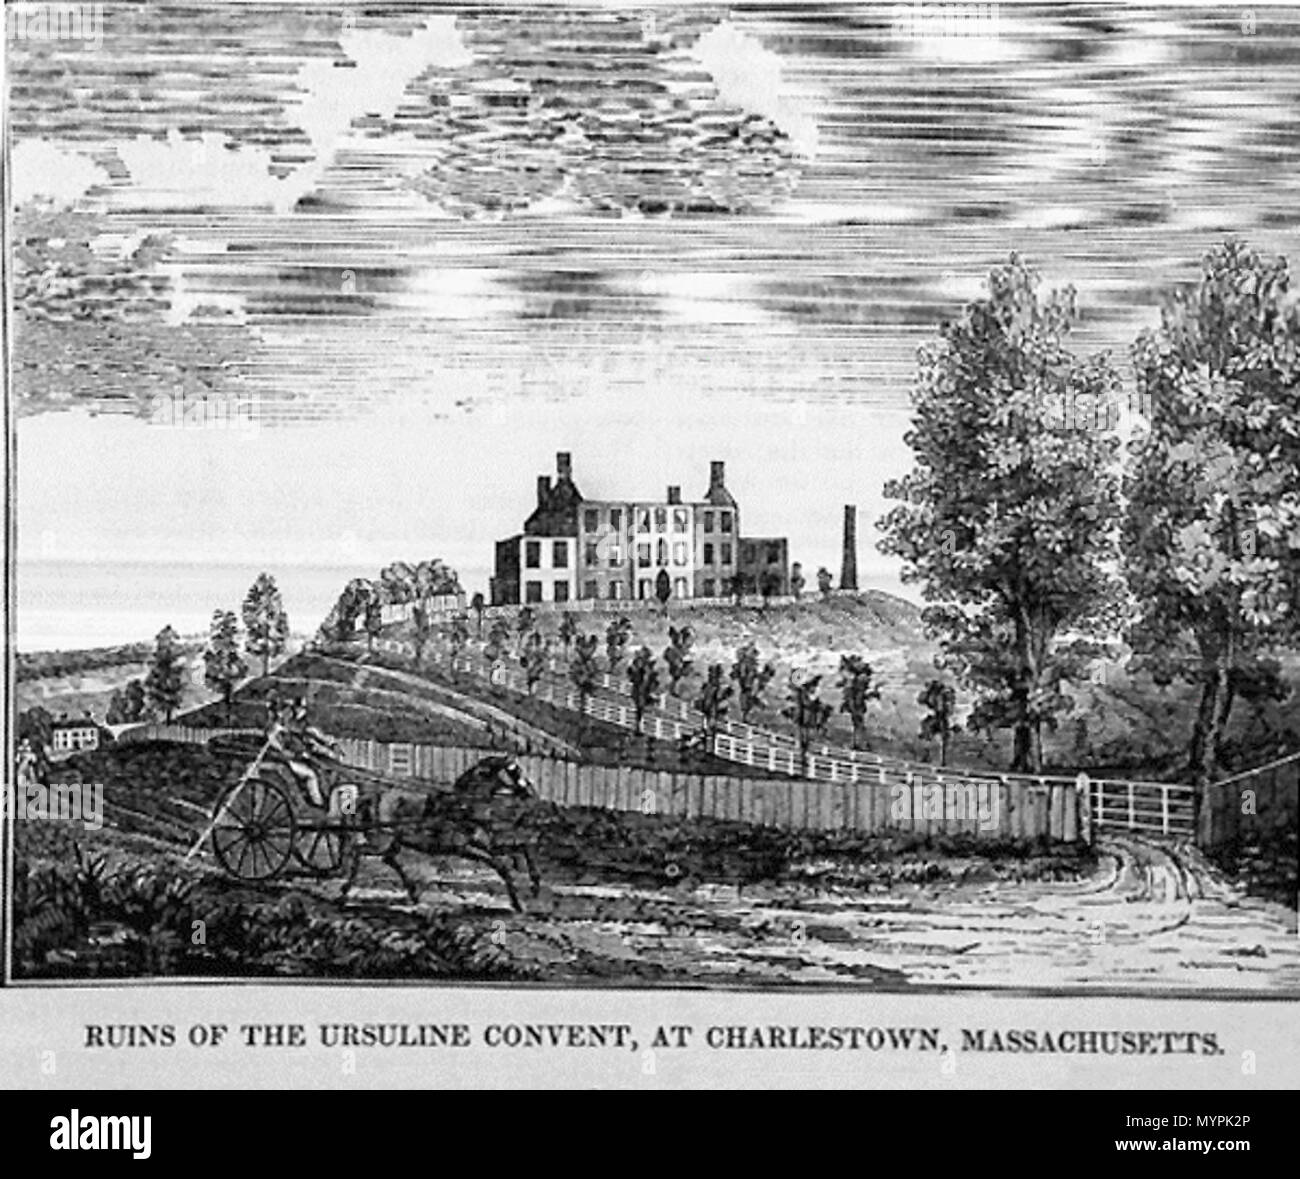 . English: 'Ruins of the Ursuline Convent, at Charlestown Massachusetts,' (Ursuline Convent Riots of August 11 & 12, 1834) wood engraving (print), original in the collection of the Charlestown (Massachusetts) Historical Society, USA . 1834. unidentified artist, historical print 464 Ruins of Ursuline Convent 1834 Riots Stock Photo